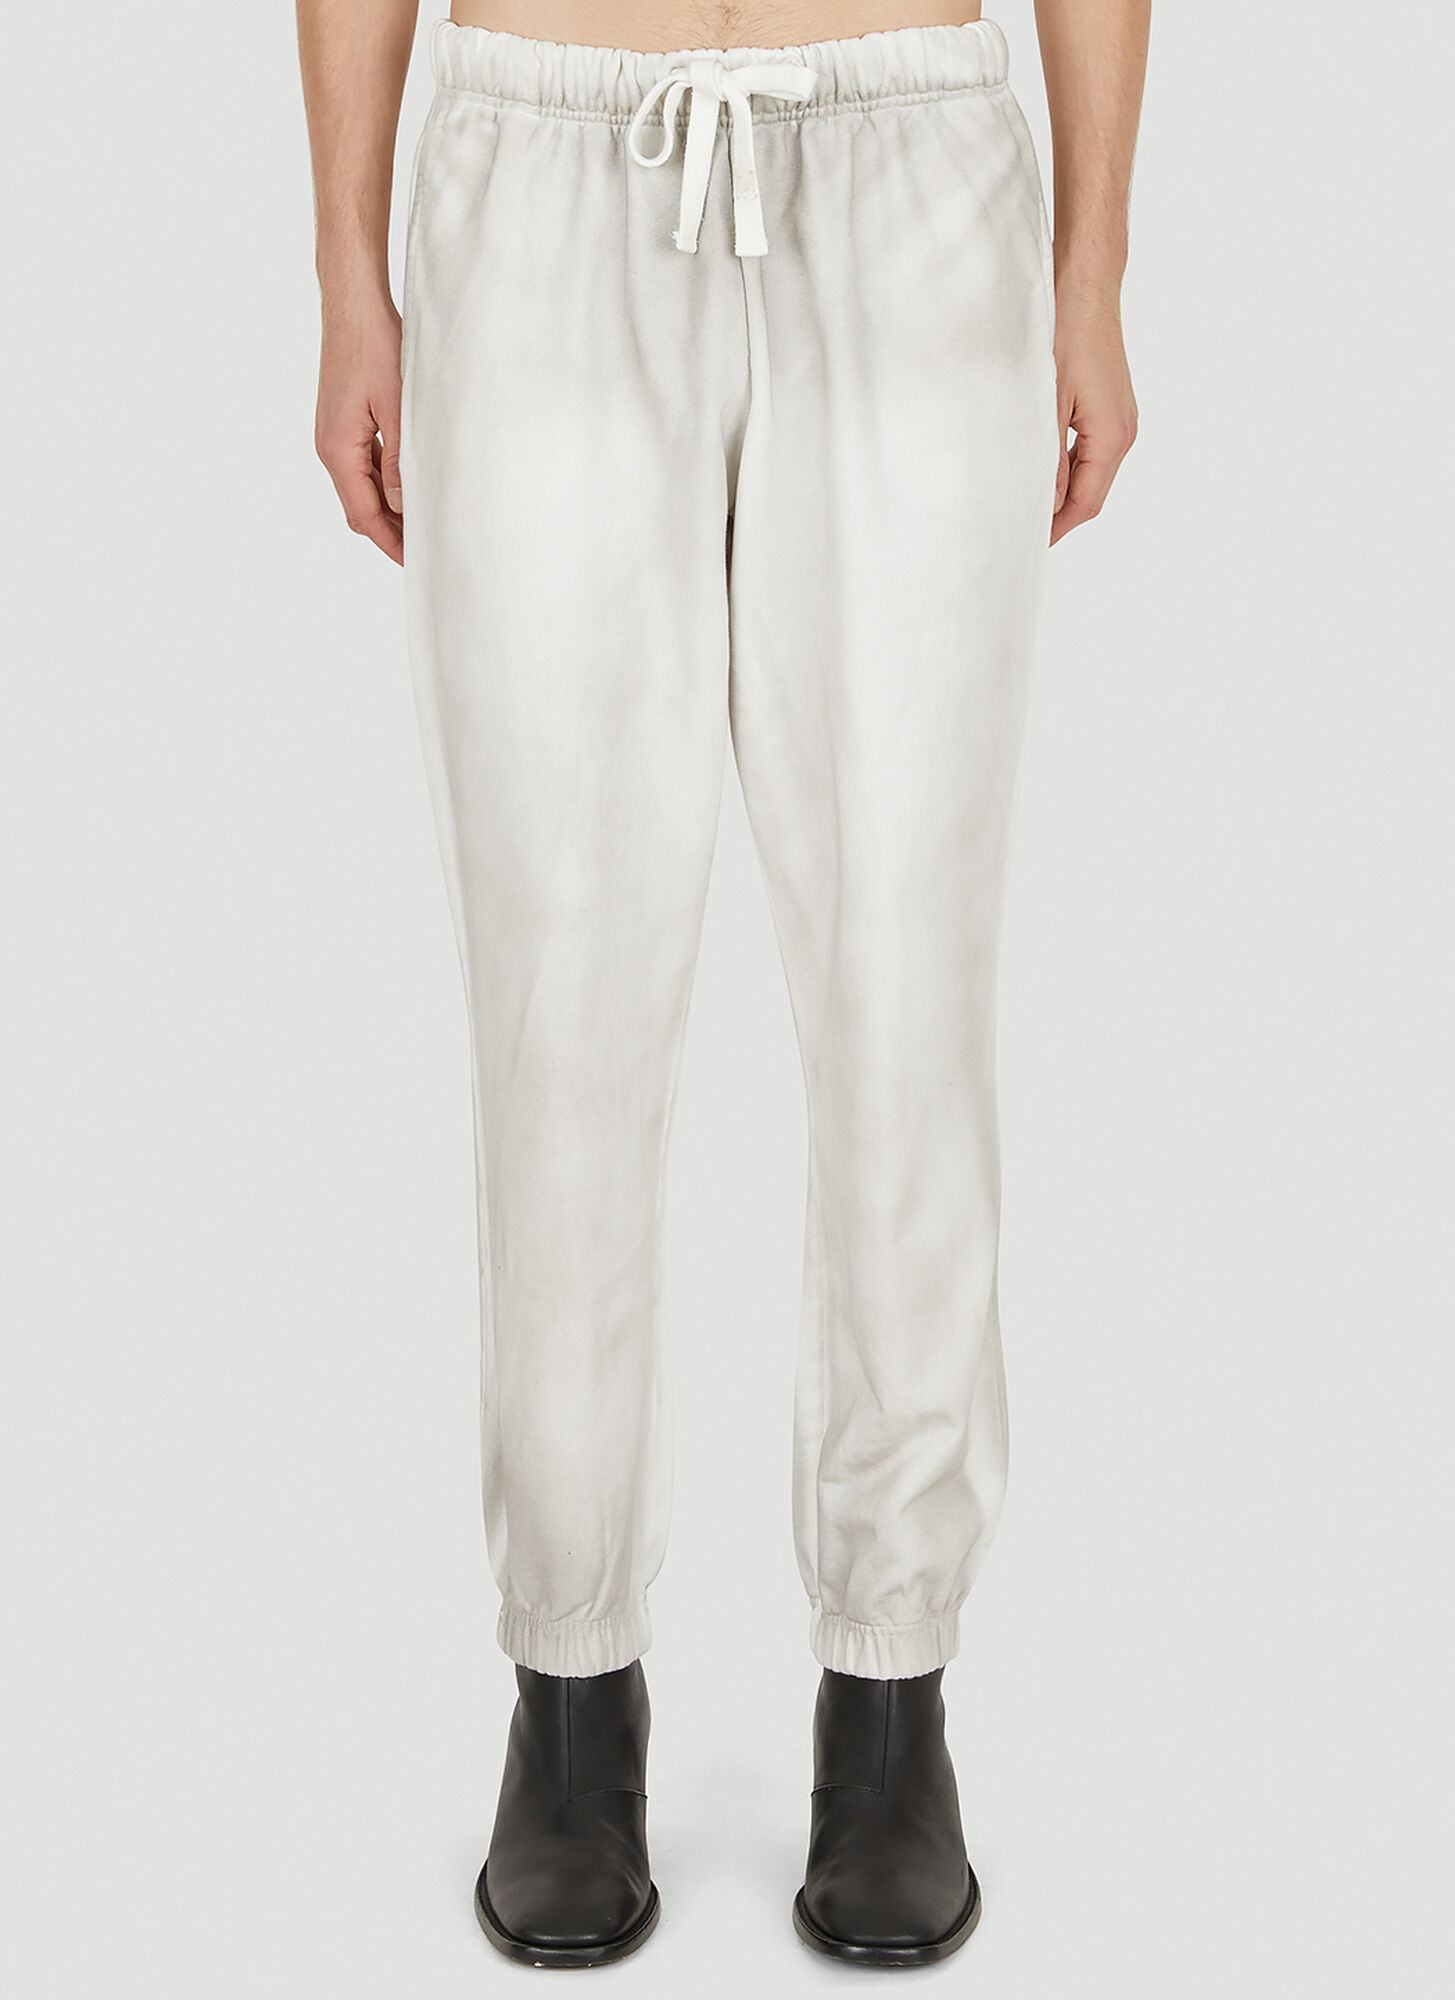 GUESS USA GUESS USA WASHED TRACK PANTS MALE WHITEMALE